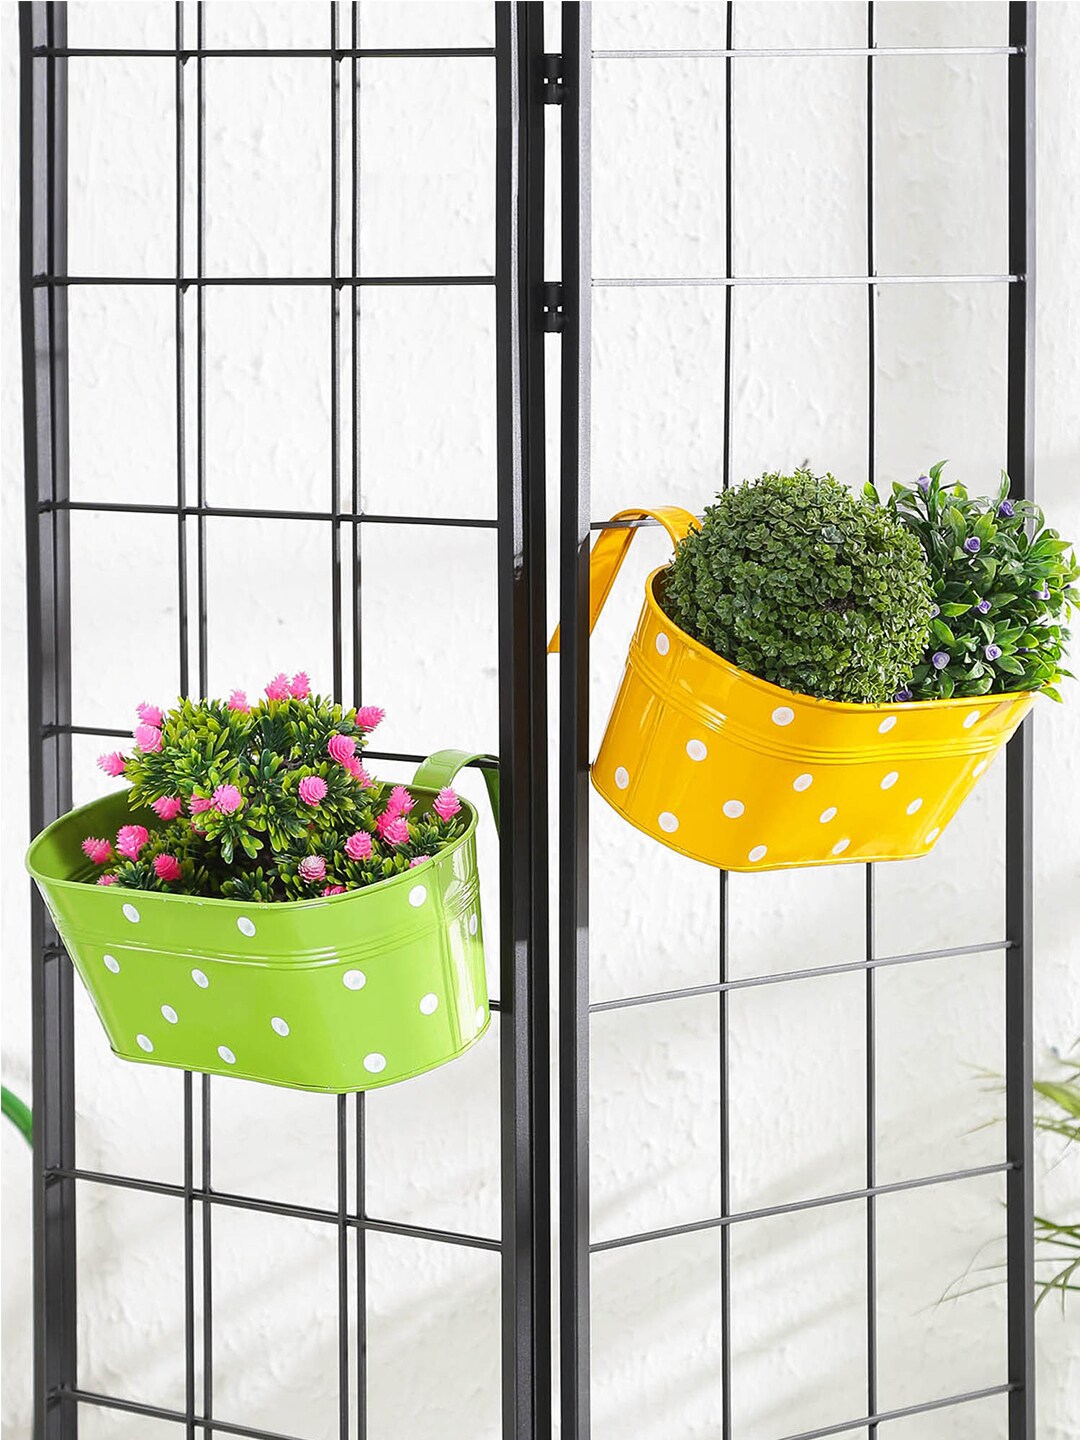 green girgit Set of 2 Yellow & Green Printed Oval Hanging Planters Price in India